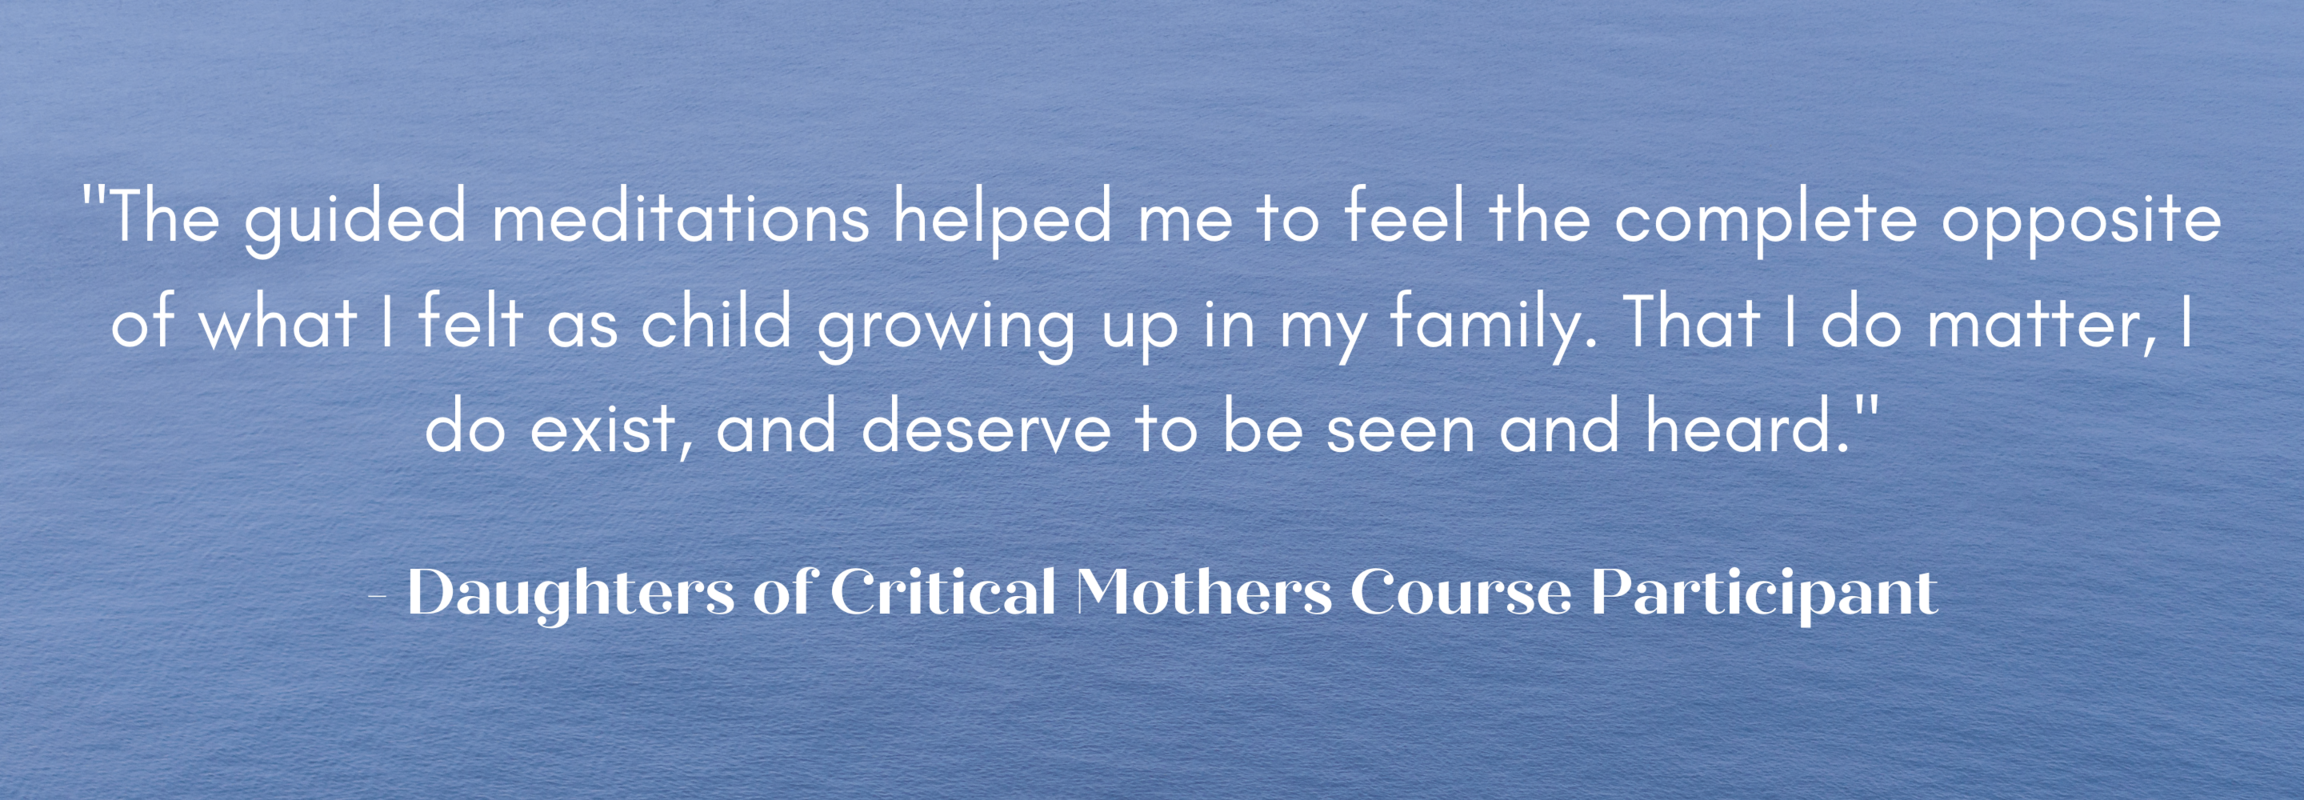 "This course is a good path to explore and understand the mother/daughter relationship and interactions, and a great complement to the work I am doing with my counselor. "